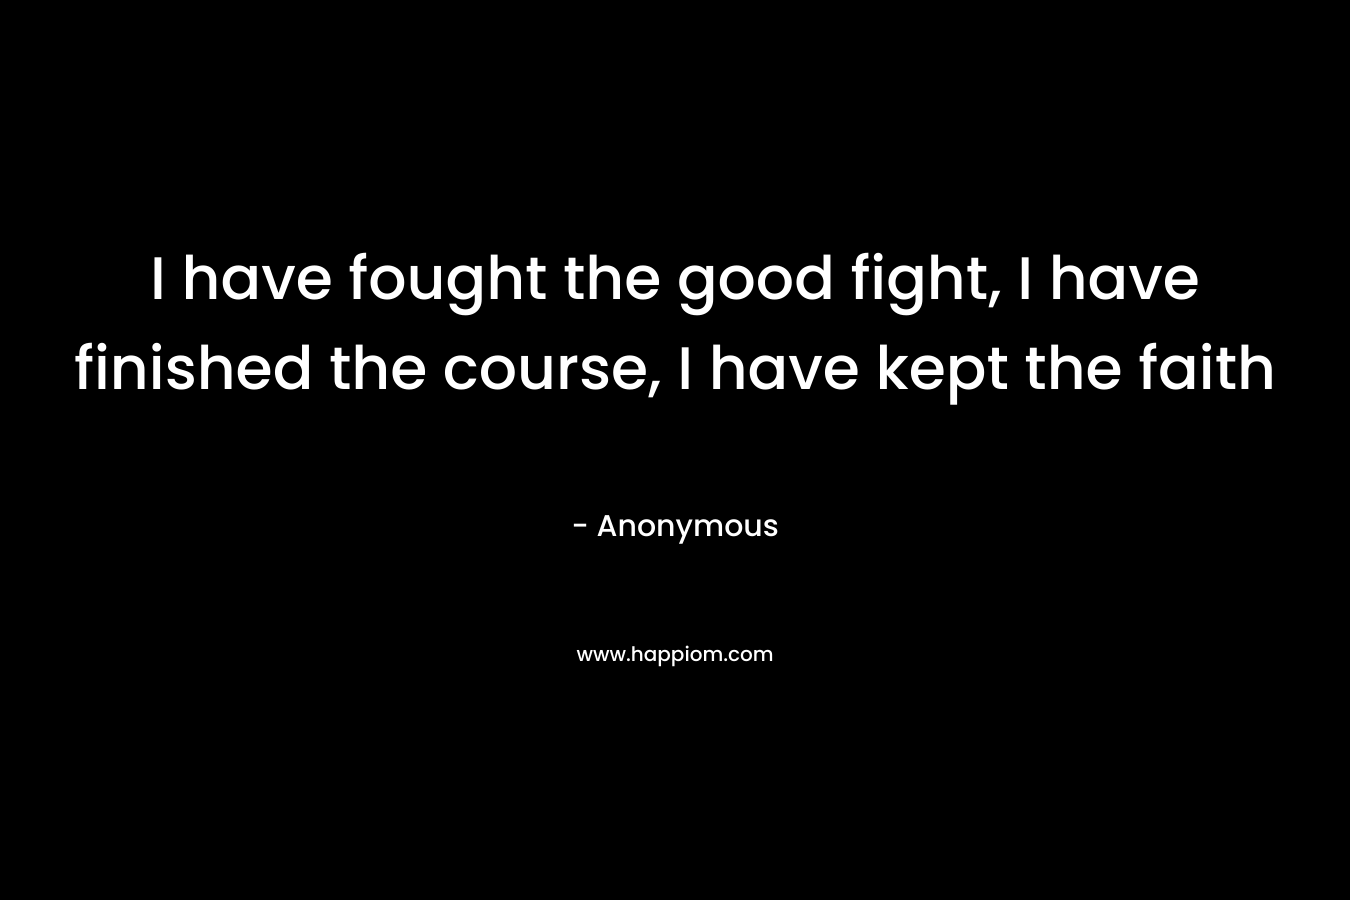 I have fought the good fight, I have finished the course, I have kept the faith – Anonymous